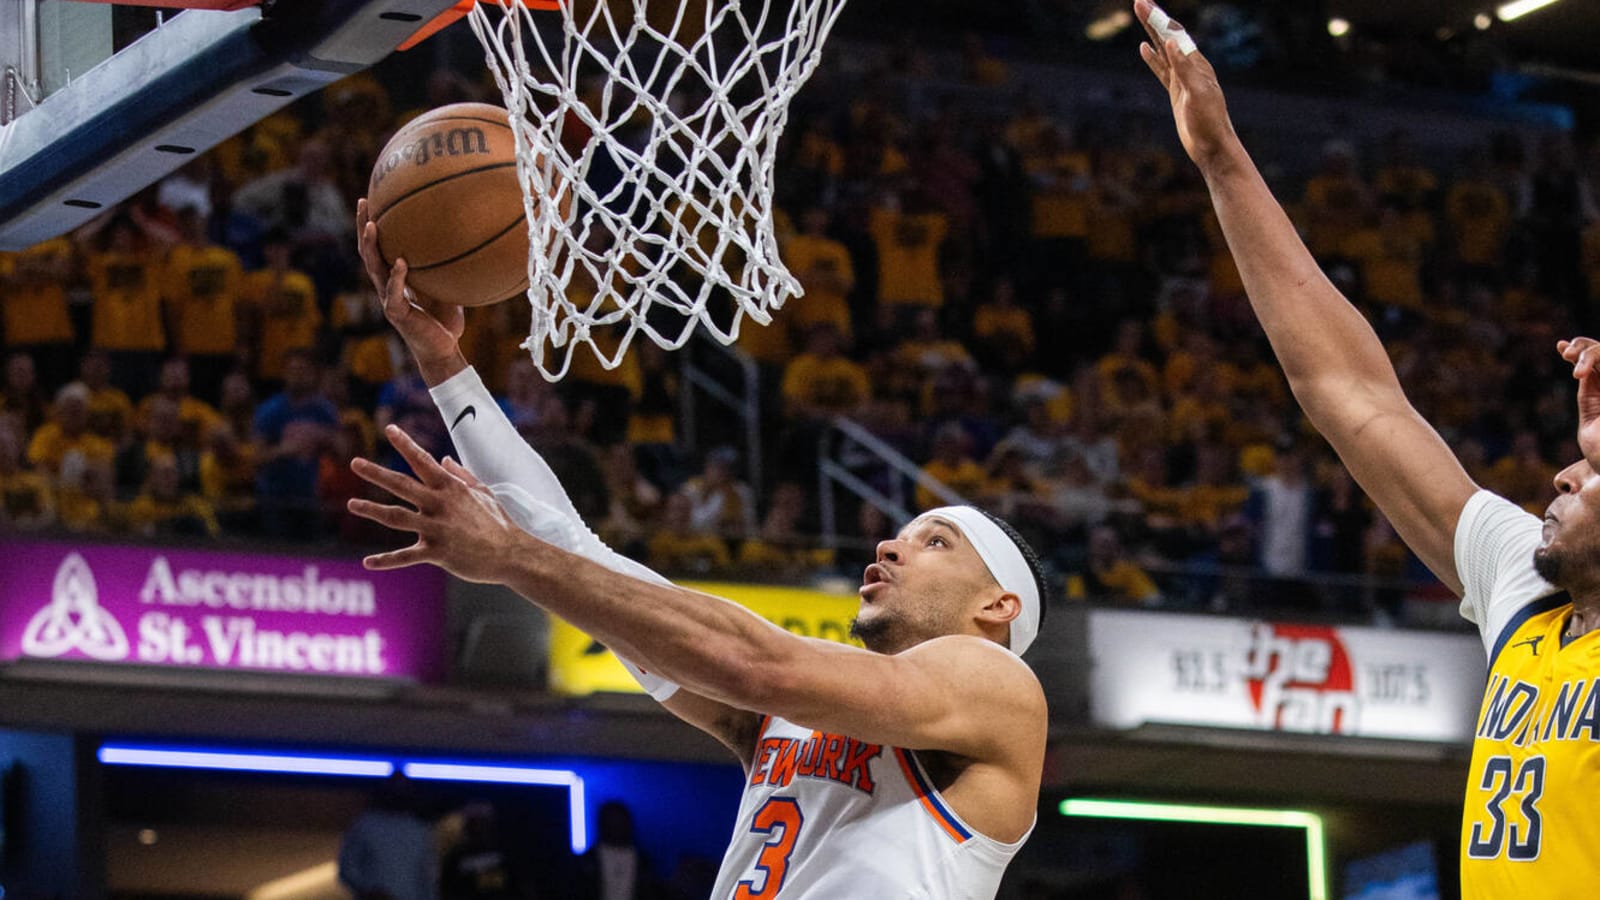 Watch: Knicks star complains about officiating in Game 3 loss